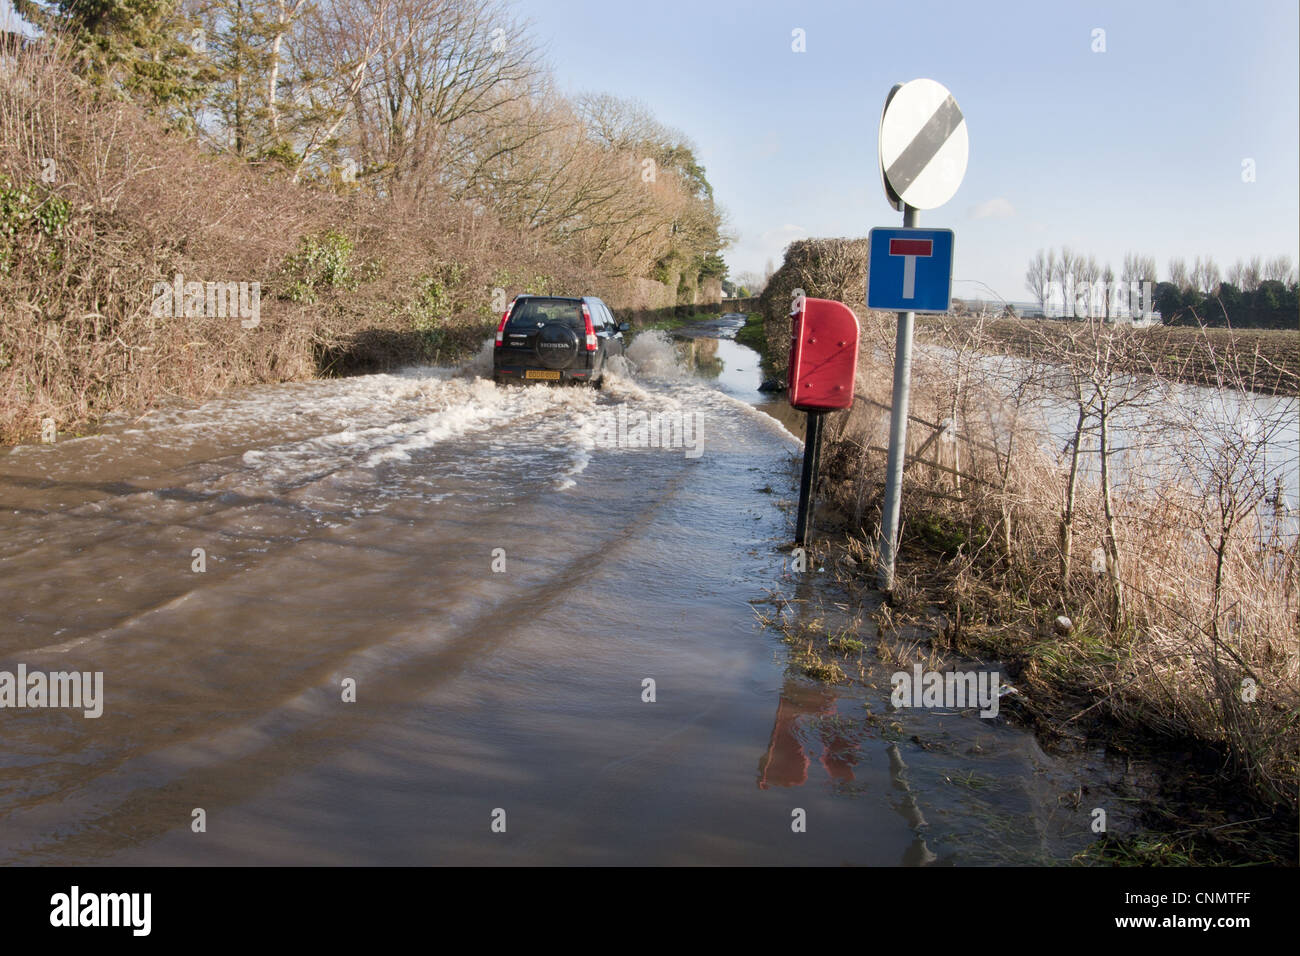 Flooded rural road with vehicle driving through, West Sussex, England, january Stock Photo